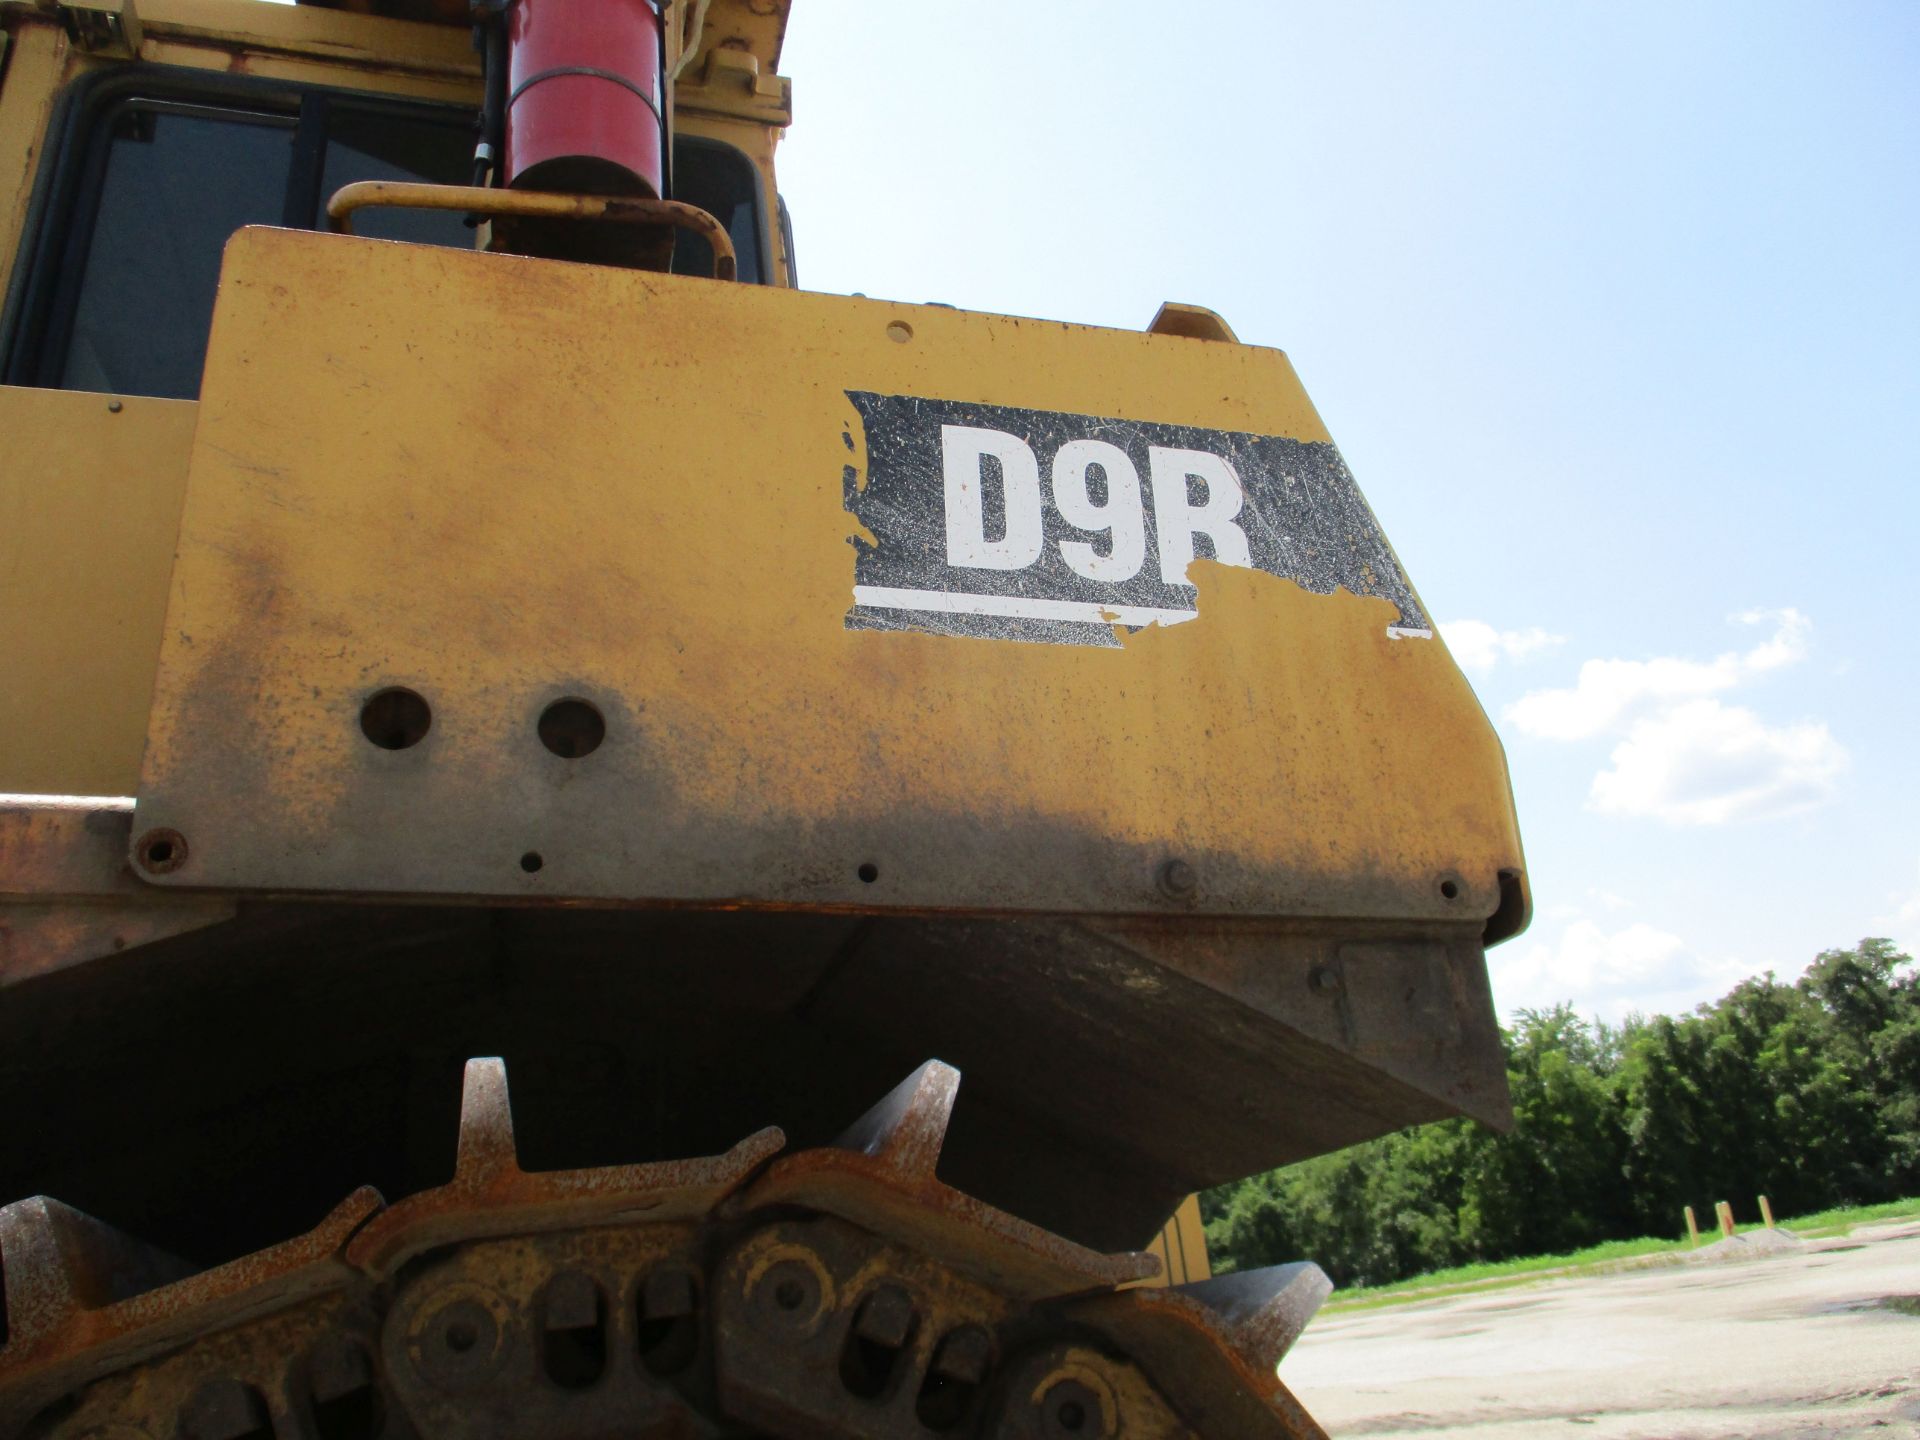 CATERPILLAR MODEL D9R INCLINE TRACK CRAWLER DOZER; S/N D9R-7TL00954, 16,868 HOURS - Image 11 of 11